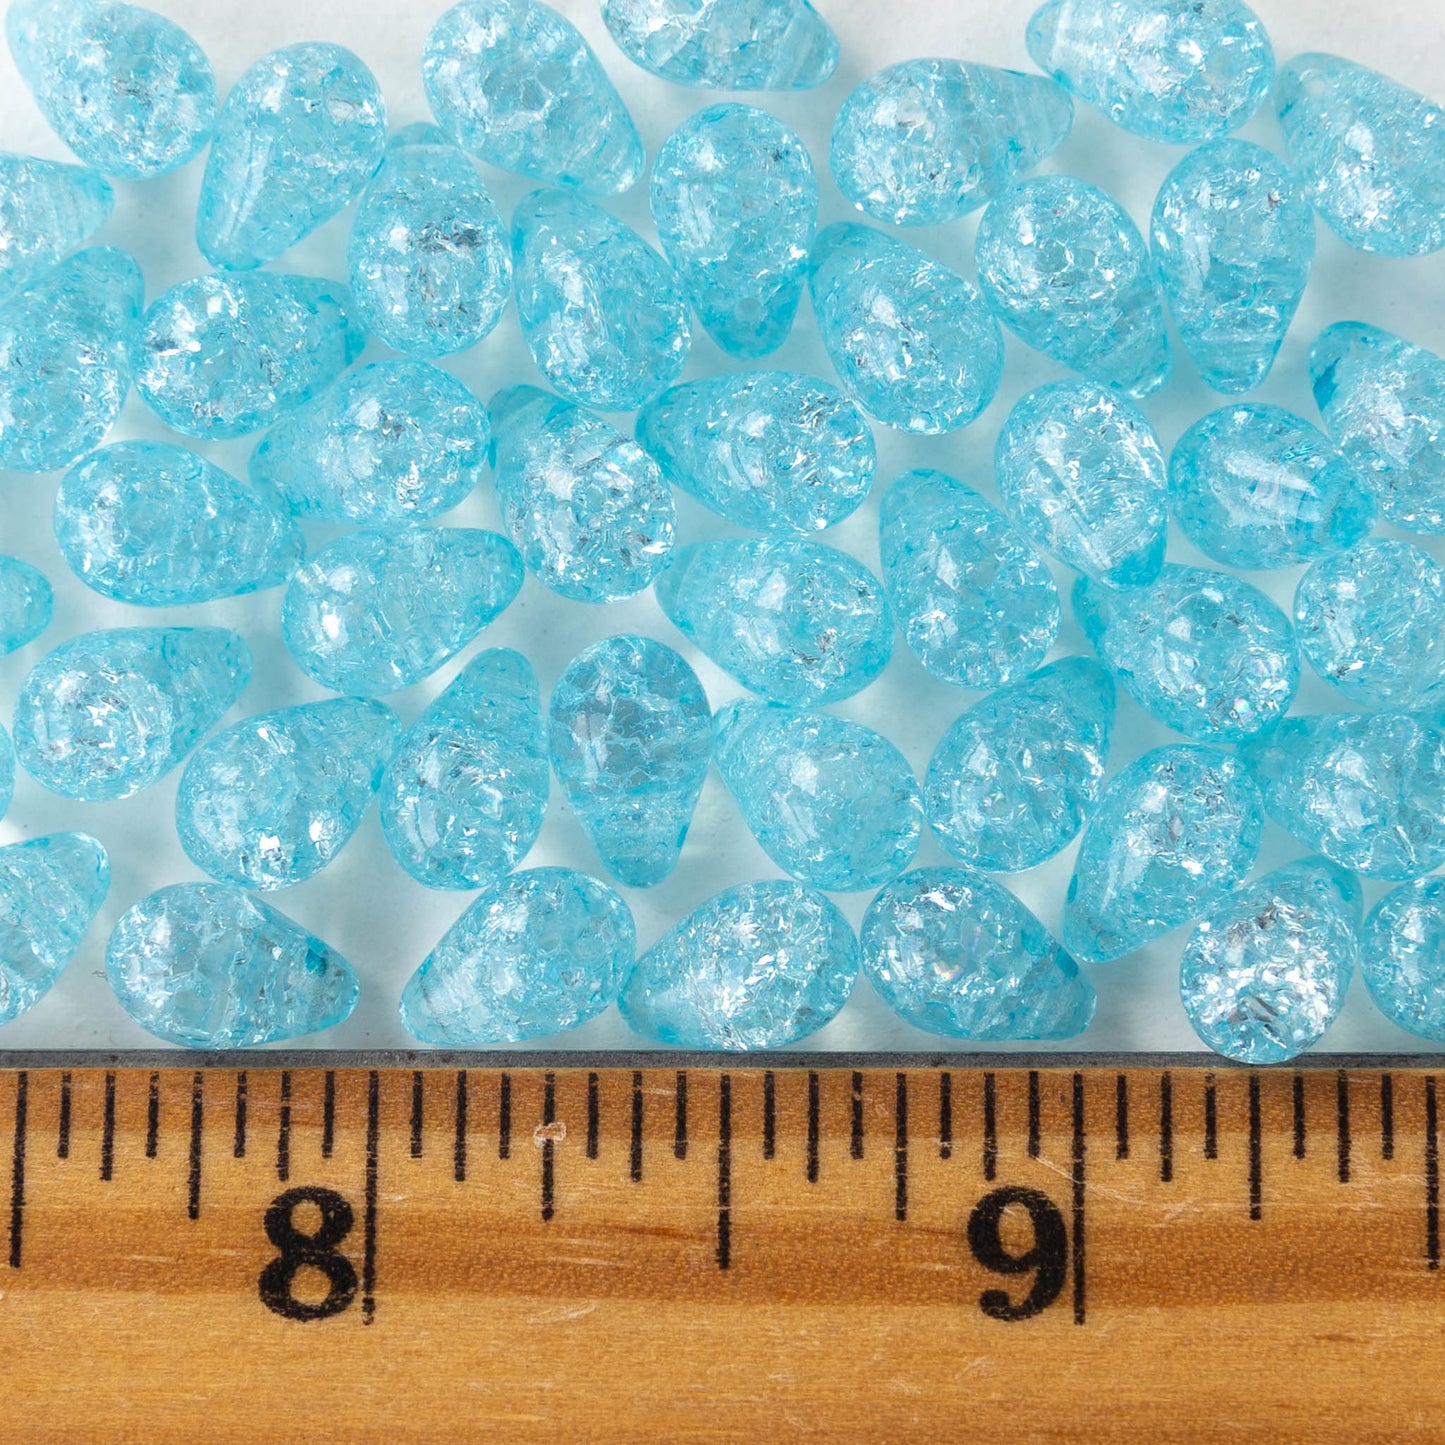 Load image into Gallery viewer, 6x9mm Glass Teardrop Beads - Lt. Aqua Crackle - 50 Beads
